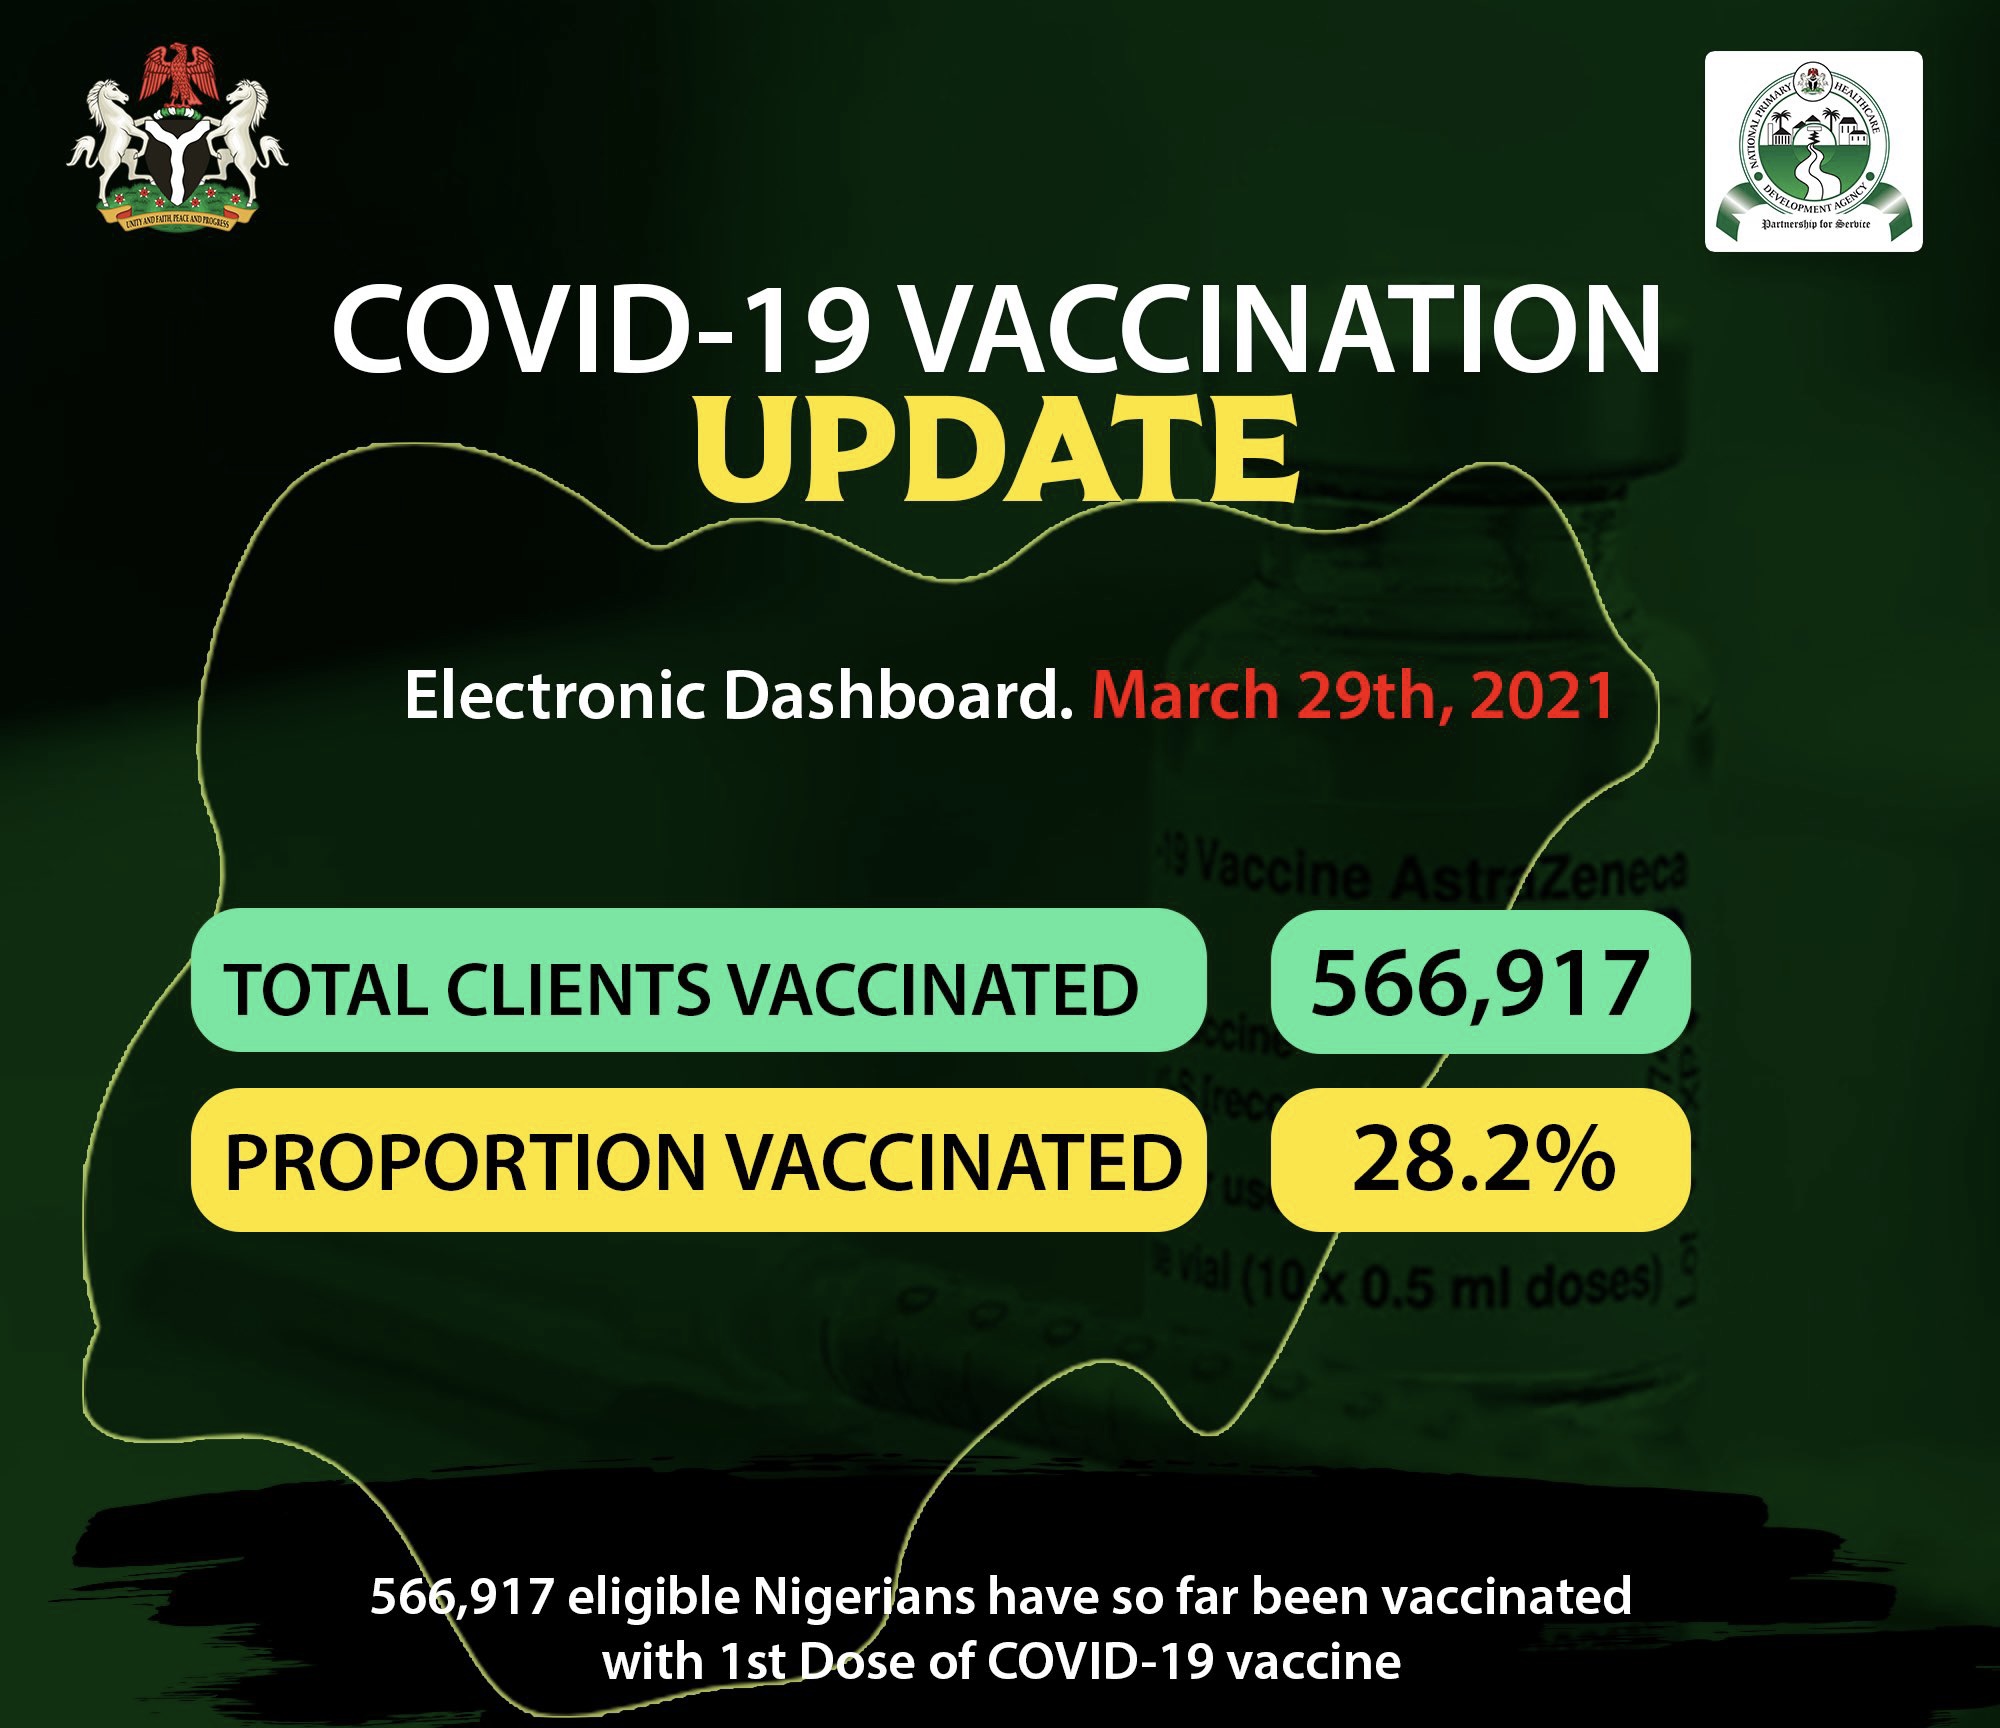 Over 560,000 Nigerians Have Received First Dose Of COVID-19 Vaccine - NPHCDA